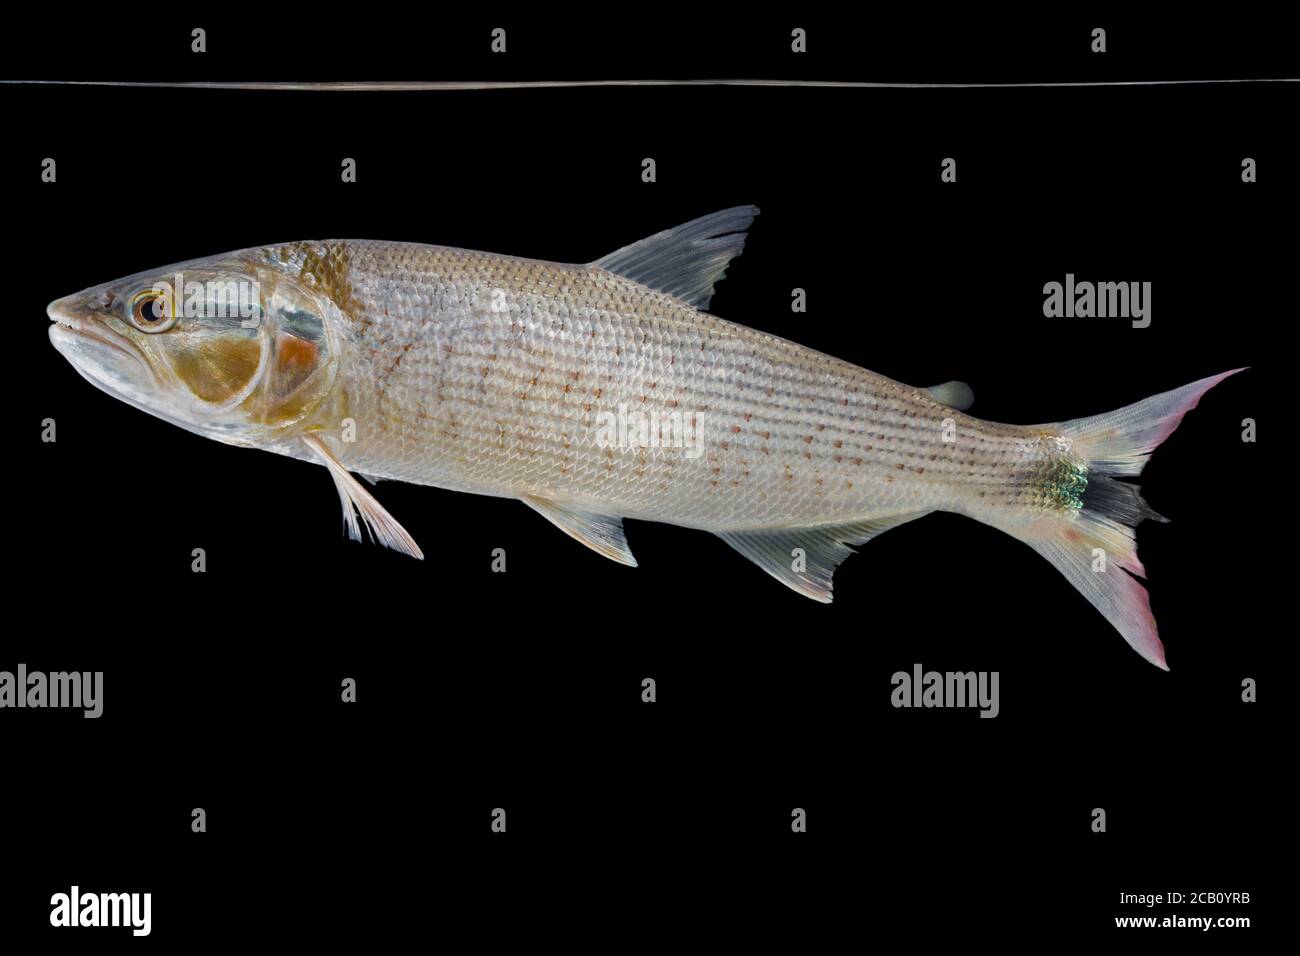 Salminus hilarii Valenciennes, 1850 is a typical predator fish found in rapid flowing streams and rivers. The individuals of the species are distribut Stock Photo